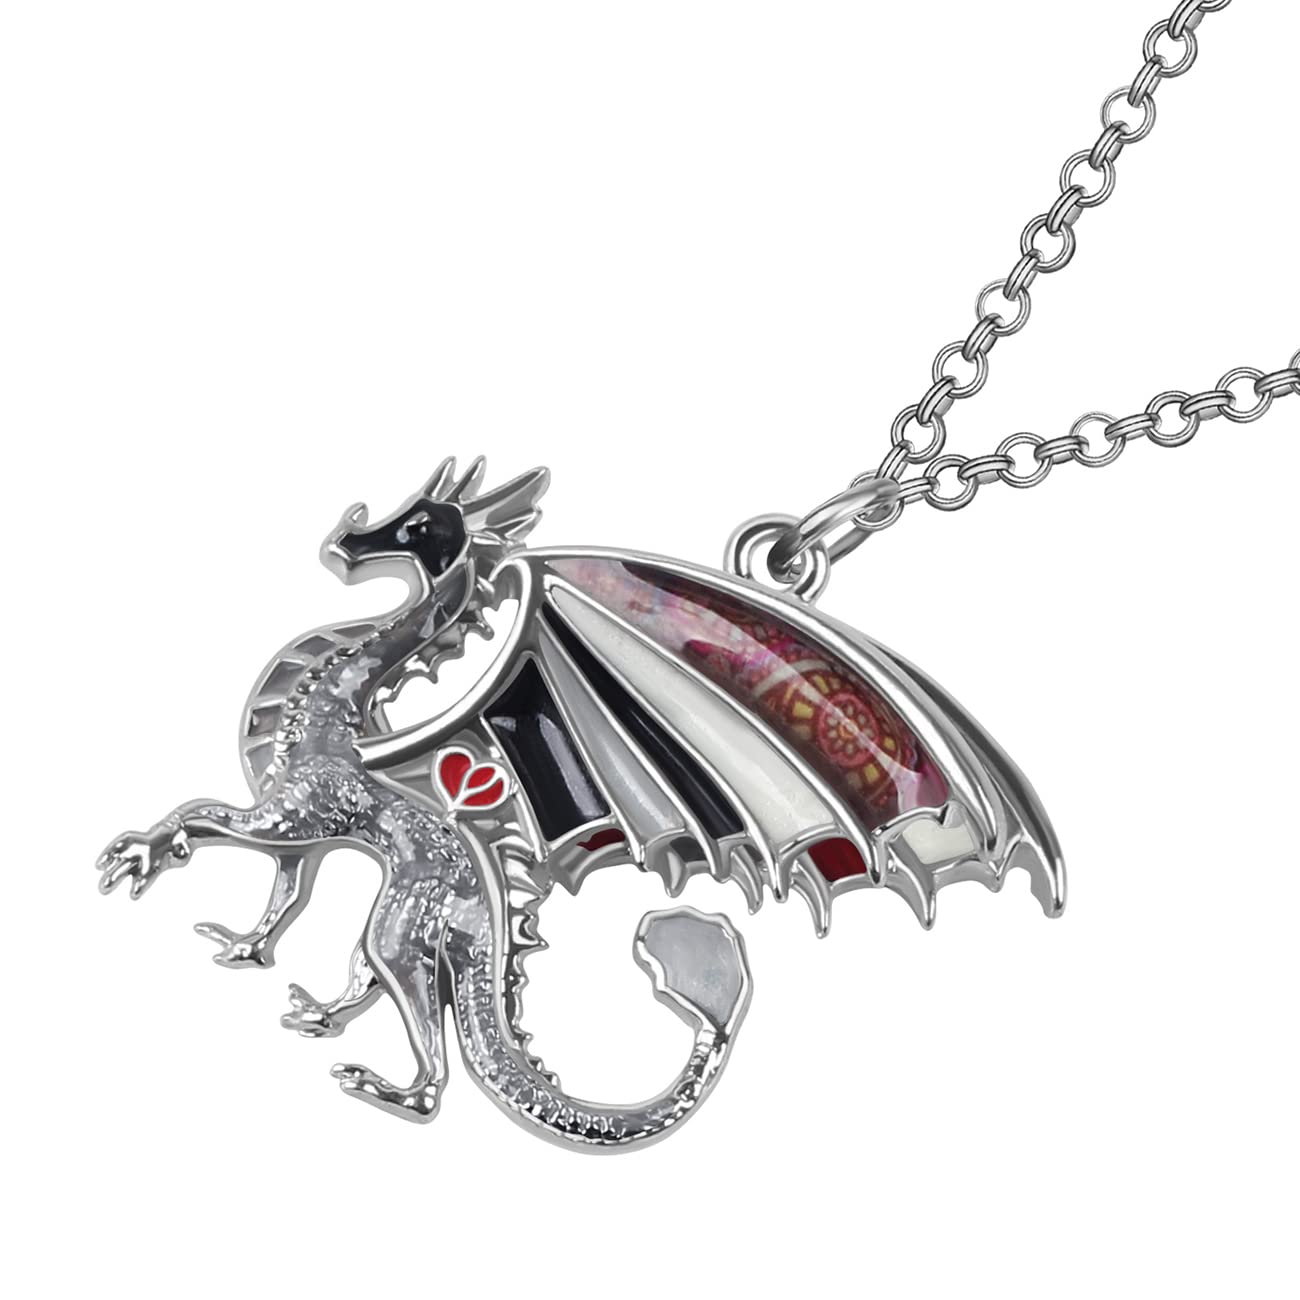 PandaWhole Luminaries Alloy Enamel Dragon Pendant Necklace with Titanium Steel Box Chains, Glow in The Dark Jewelry Wholesale Suppliers for Men Women